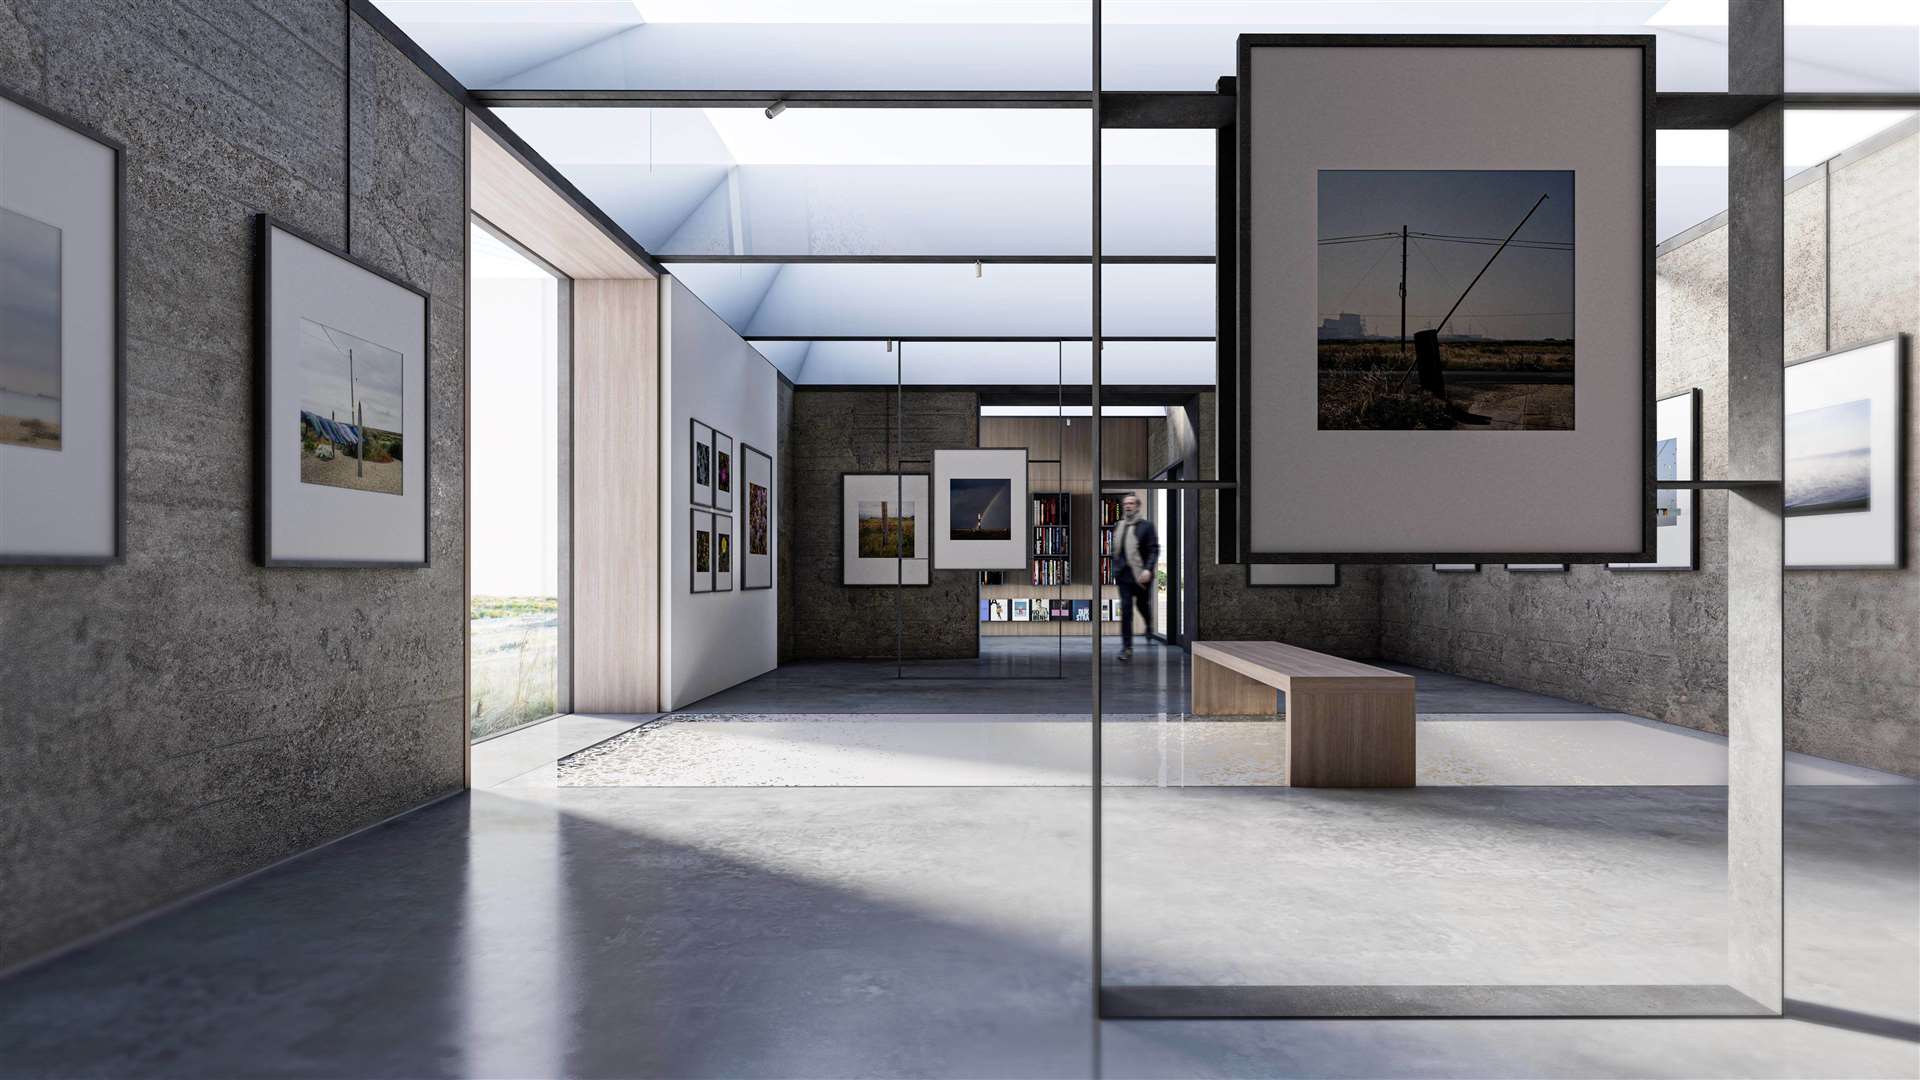 Proposed internal ground floor view of the new art gallery planned for the old pump station. Photo: MS - DA / JOHNSON NAYLOR